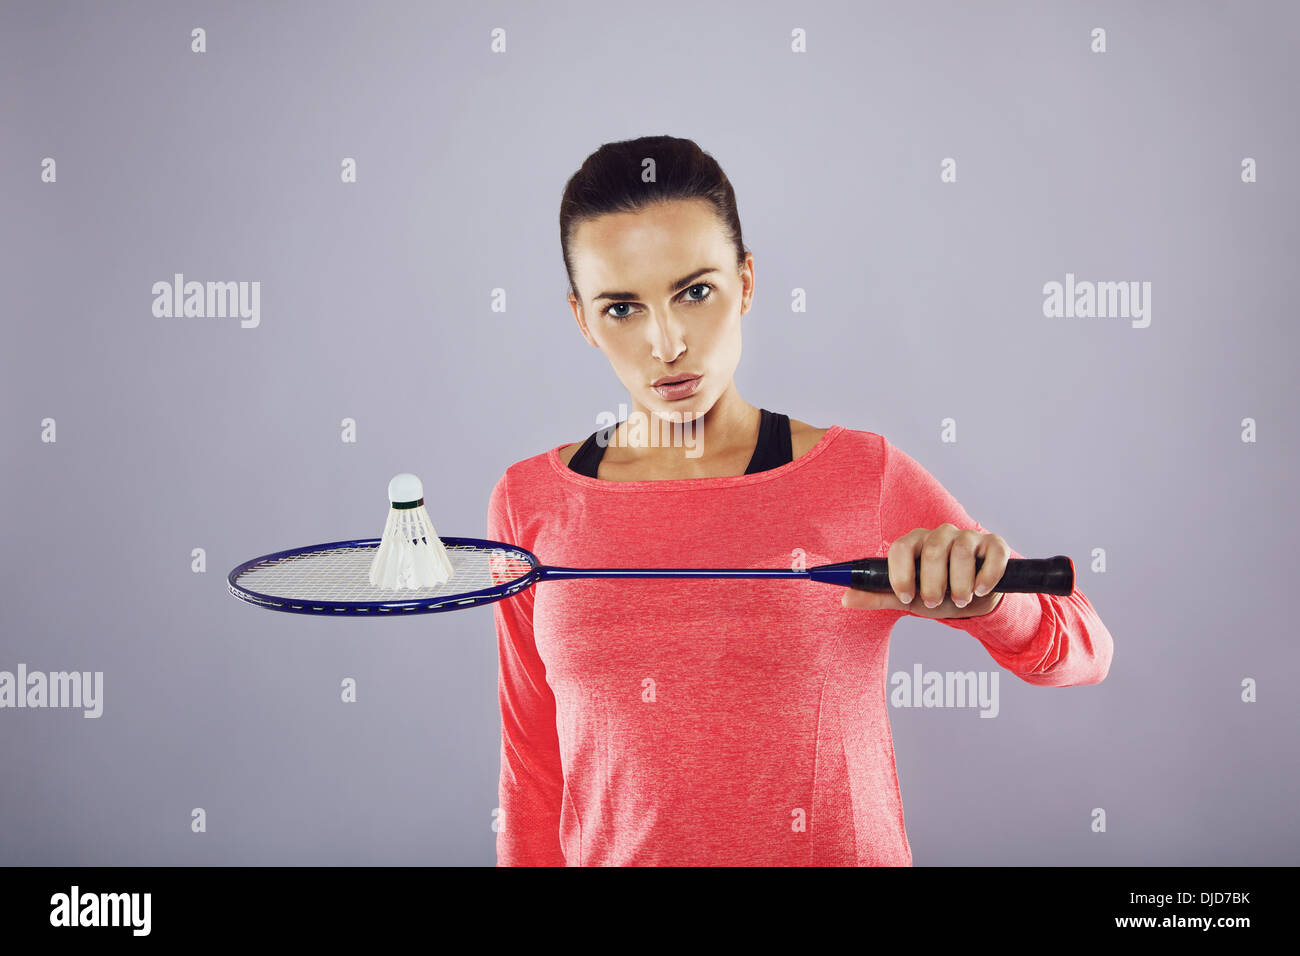 Portrait of confident young girl holding a badminton racket with shuttlecock looking at camera against grey background. Stock Photo